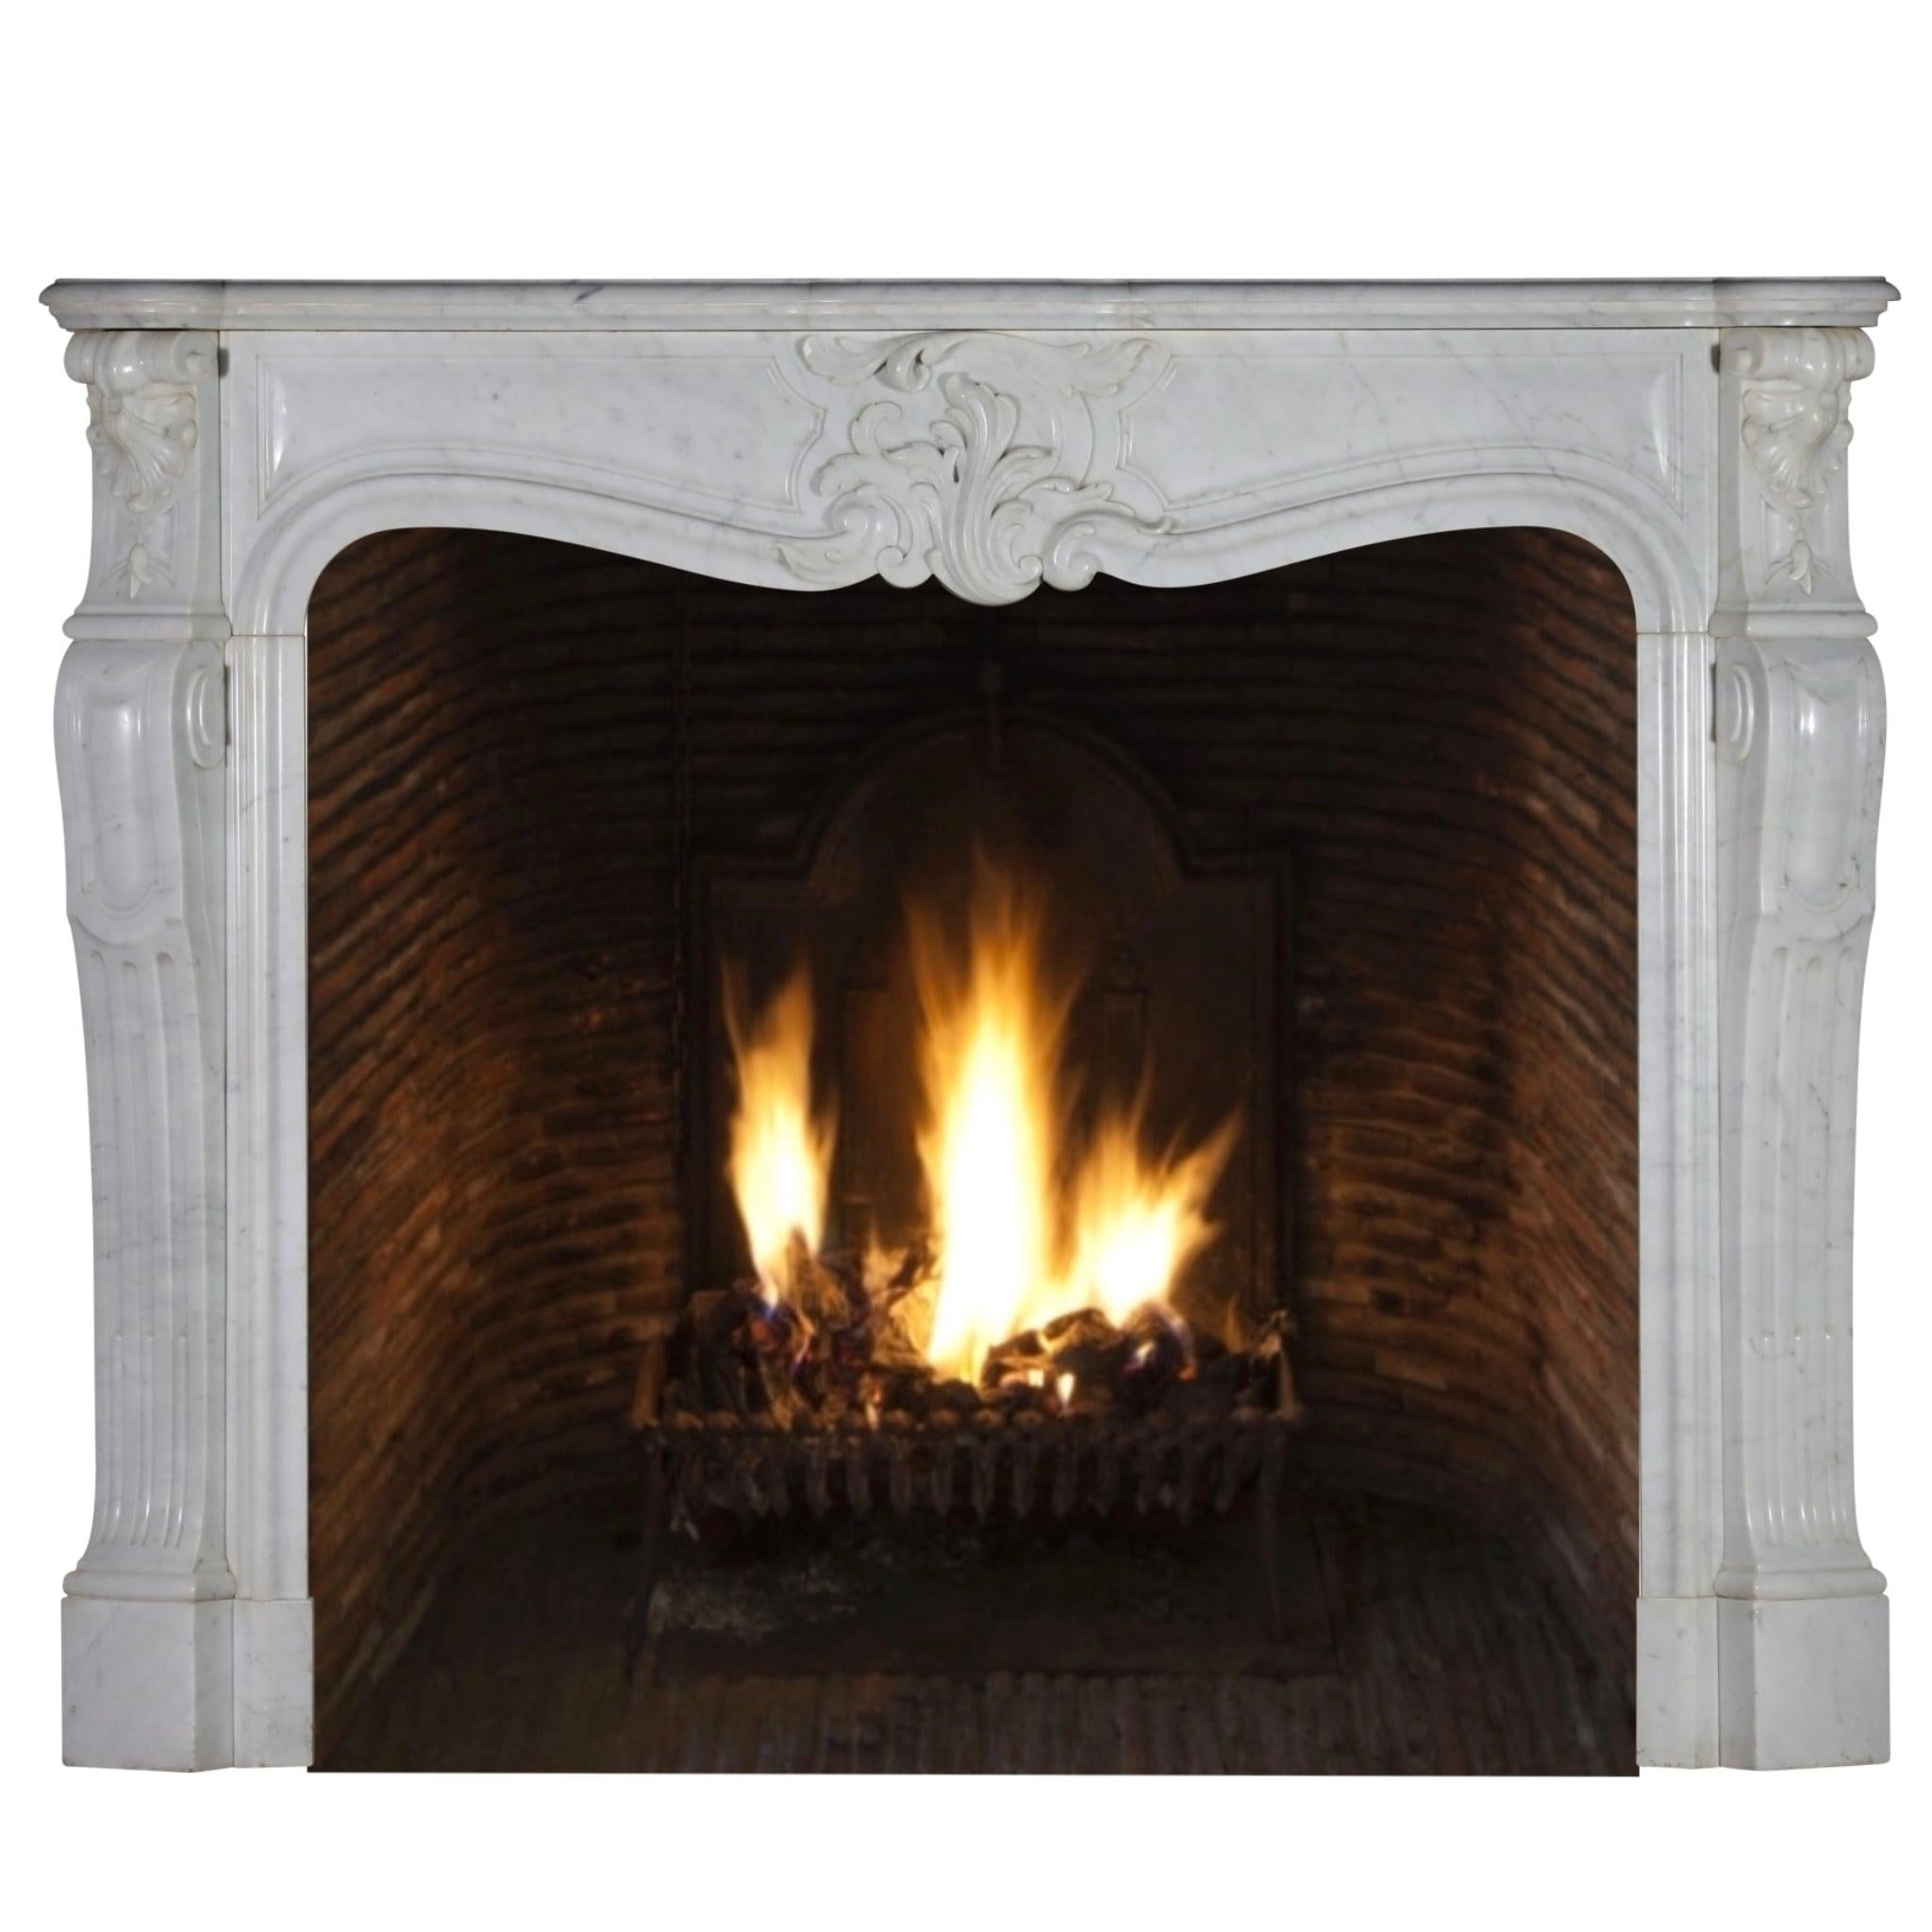 Exquisite 19th century period regency style fireplace surround reclaimed in the city of Ghent, Belgium. A classic French style mantle with deep side pieces. A real work of art; see the execution of the carving.
This chimney piece fits a square